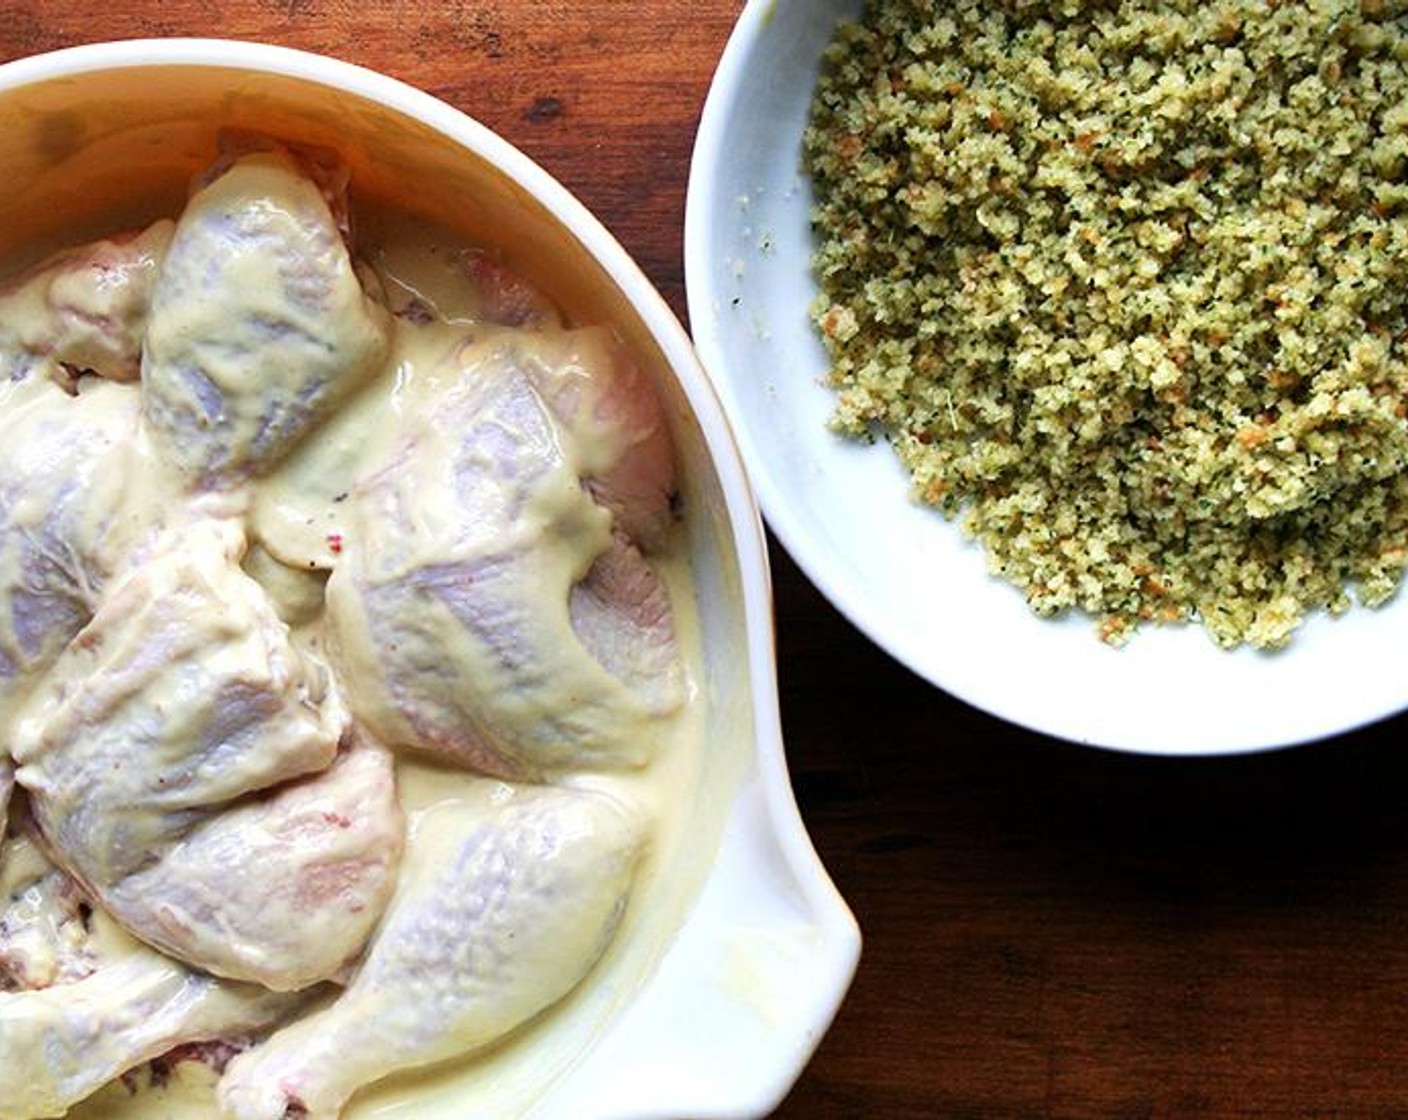 step 2 In a small bowl, whisk together the Dijon Mustard (1/2 cup) and Buttermilk (1/2 cup). Place the Bone-in, Skin-on Chicken Thighs and Drumsticks (8) in a large bowl and pour the mustard-buttermilk mixture over top. Toss to coat.